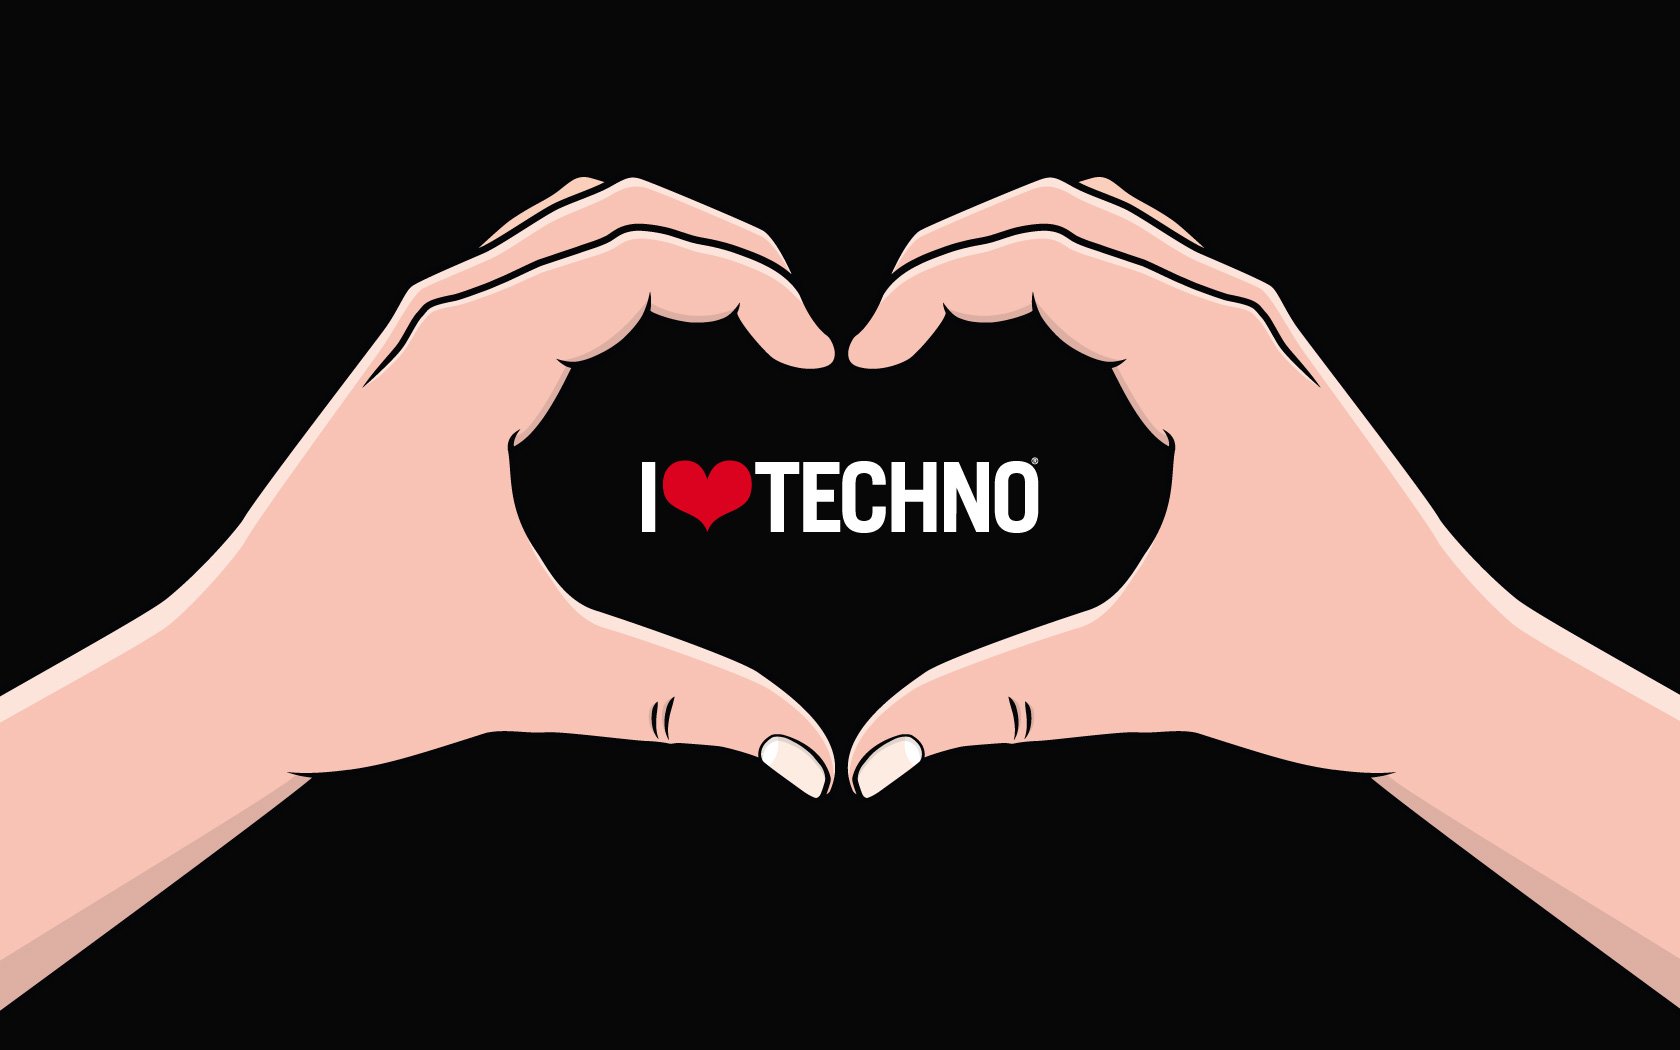 I Love Techno Festival Goes "Back To Its Roots" With 2014 Line-Up